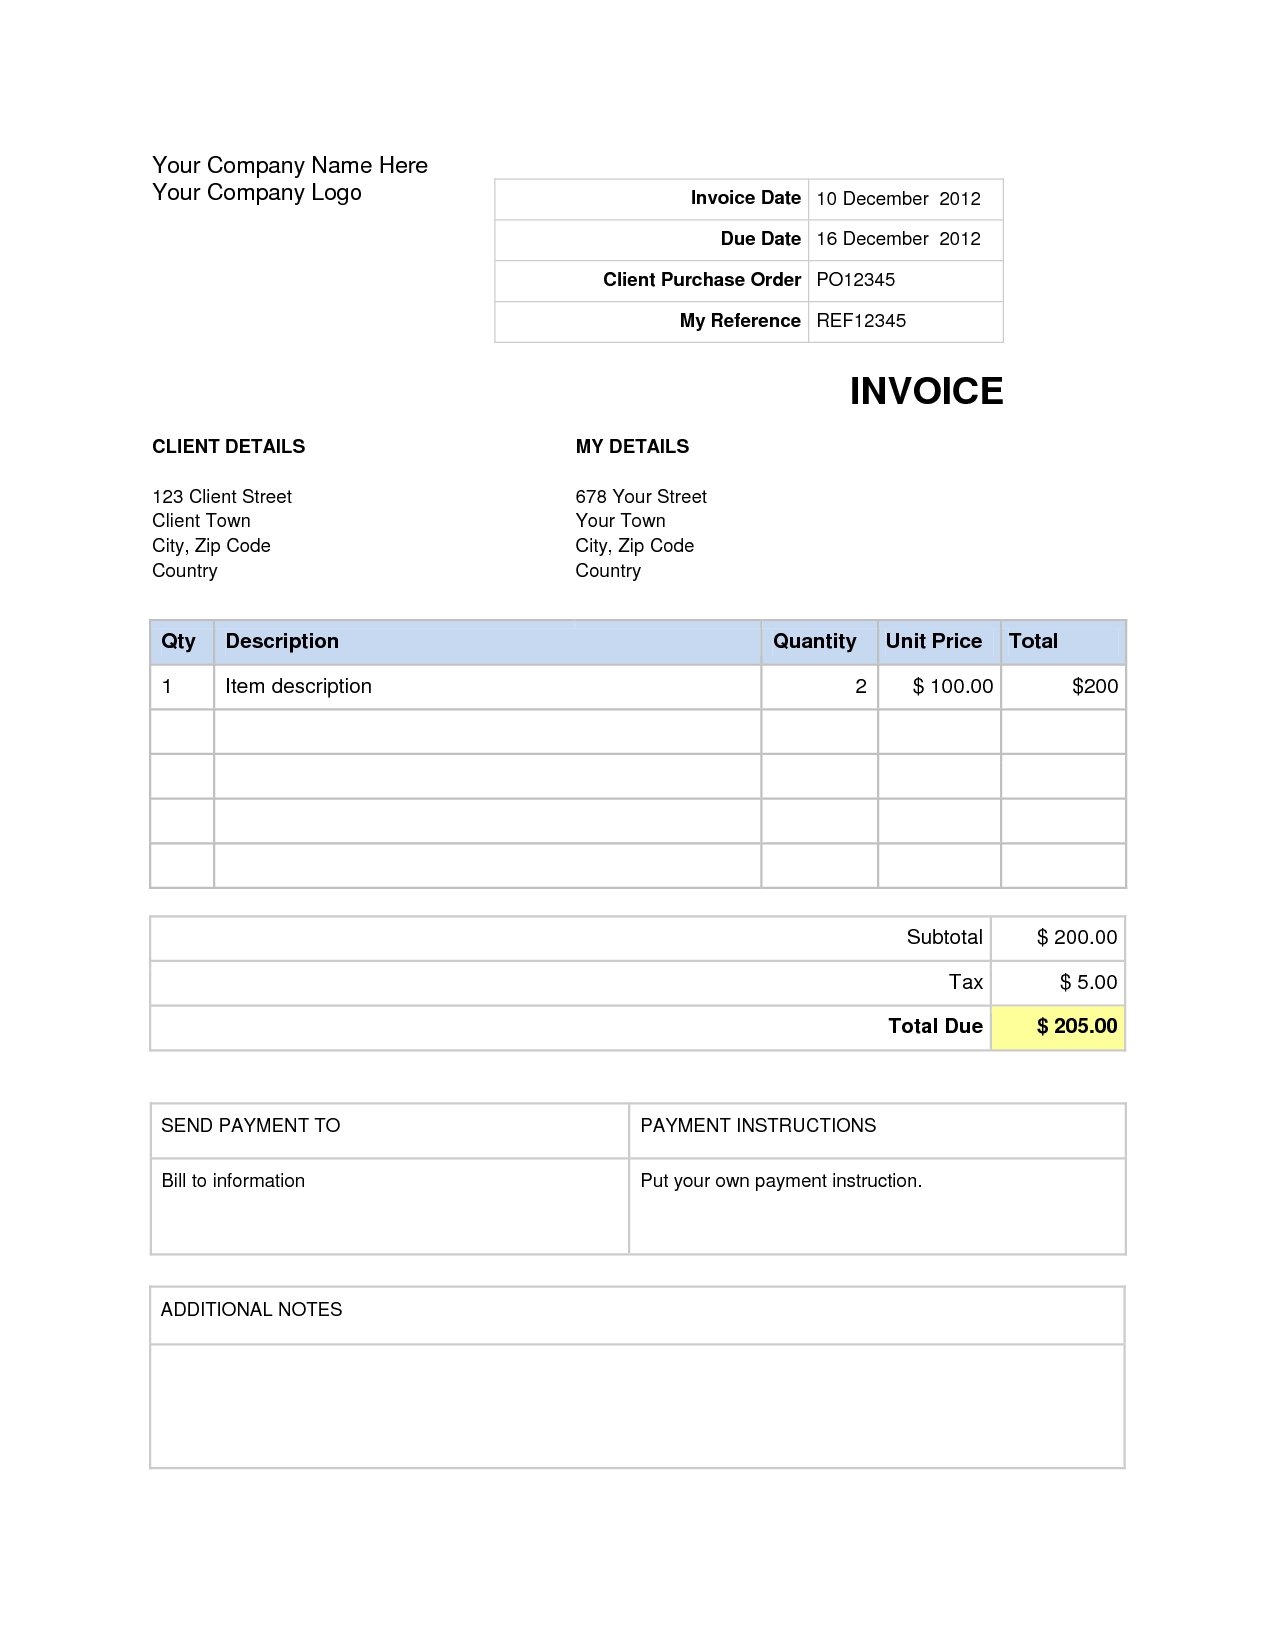 invoice format doc microsoft templates invoice word doc simple invoice format word